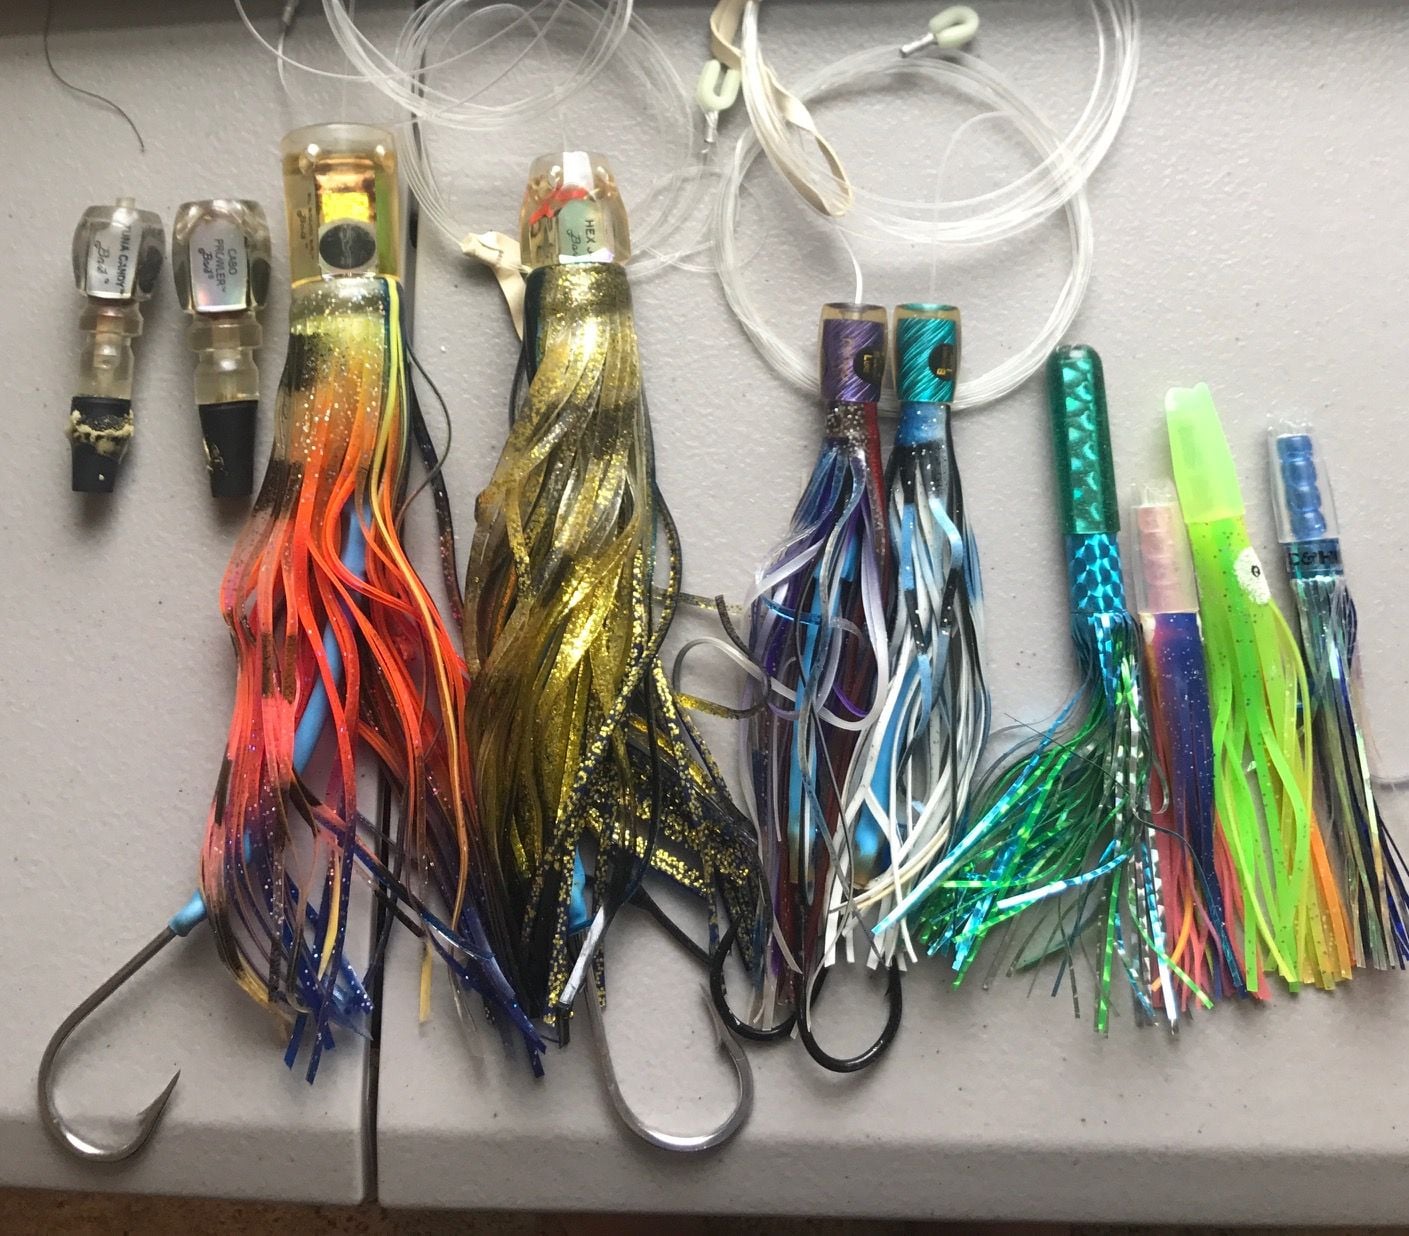 Lot of tuna trolling lures - The Hull Truth - Boating and Fishing Forum